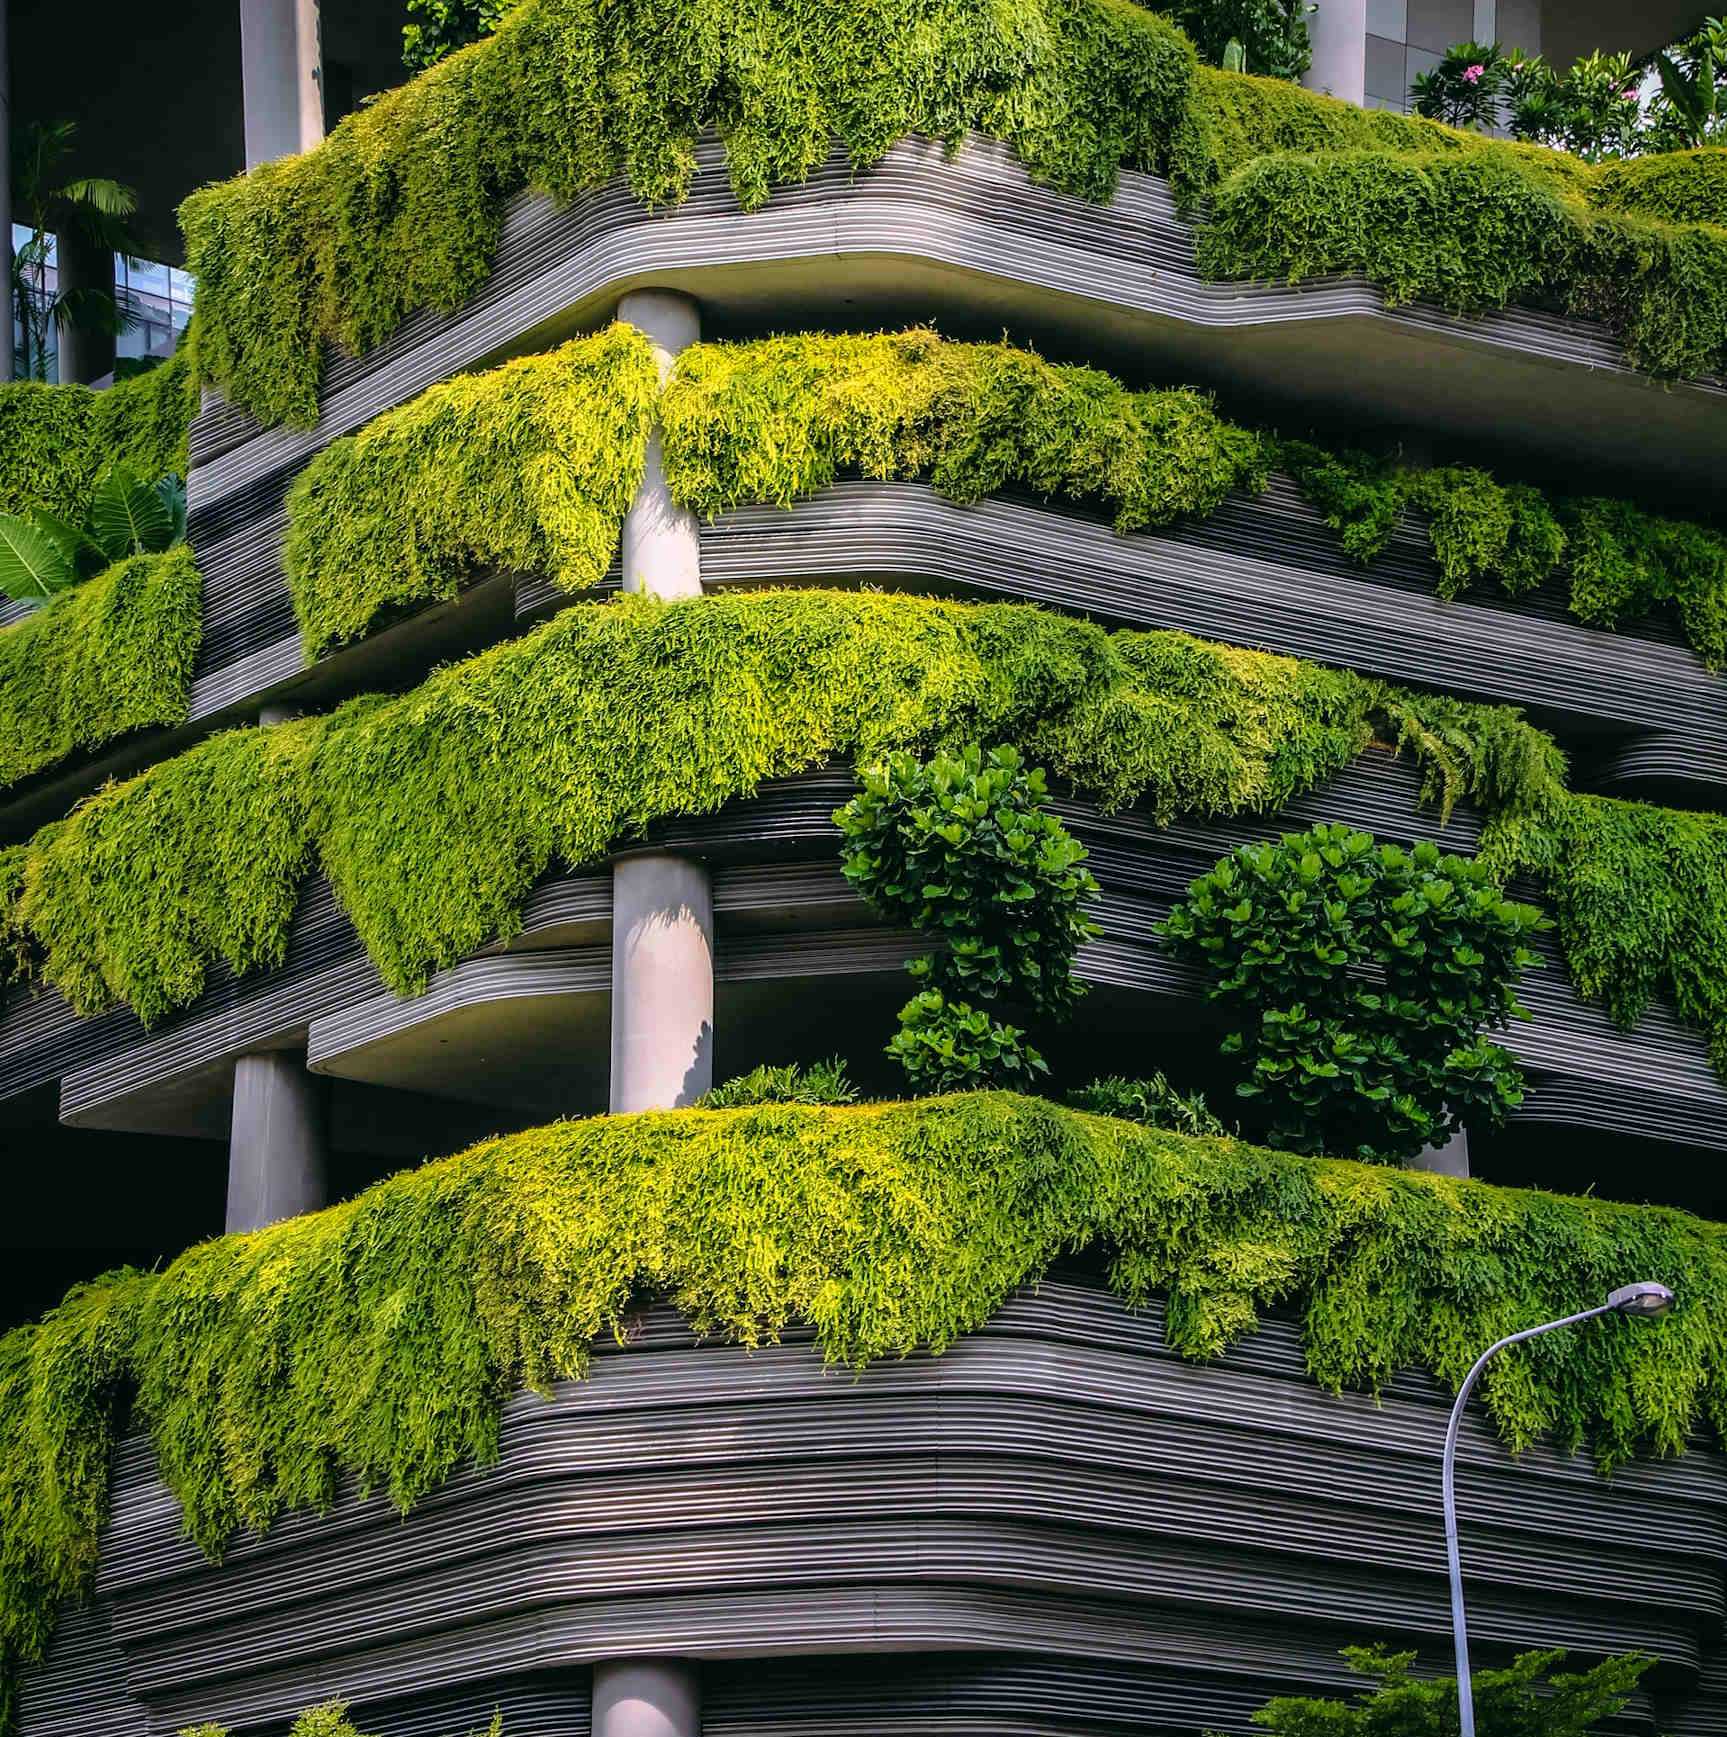 Enlarged view: Vertical garden at Parkroyal on Pickering, Singapore ( CC0 1.0 / Victor / Unsplash )